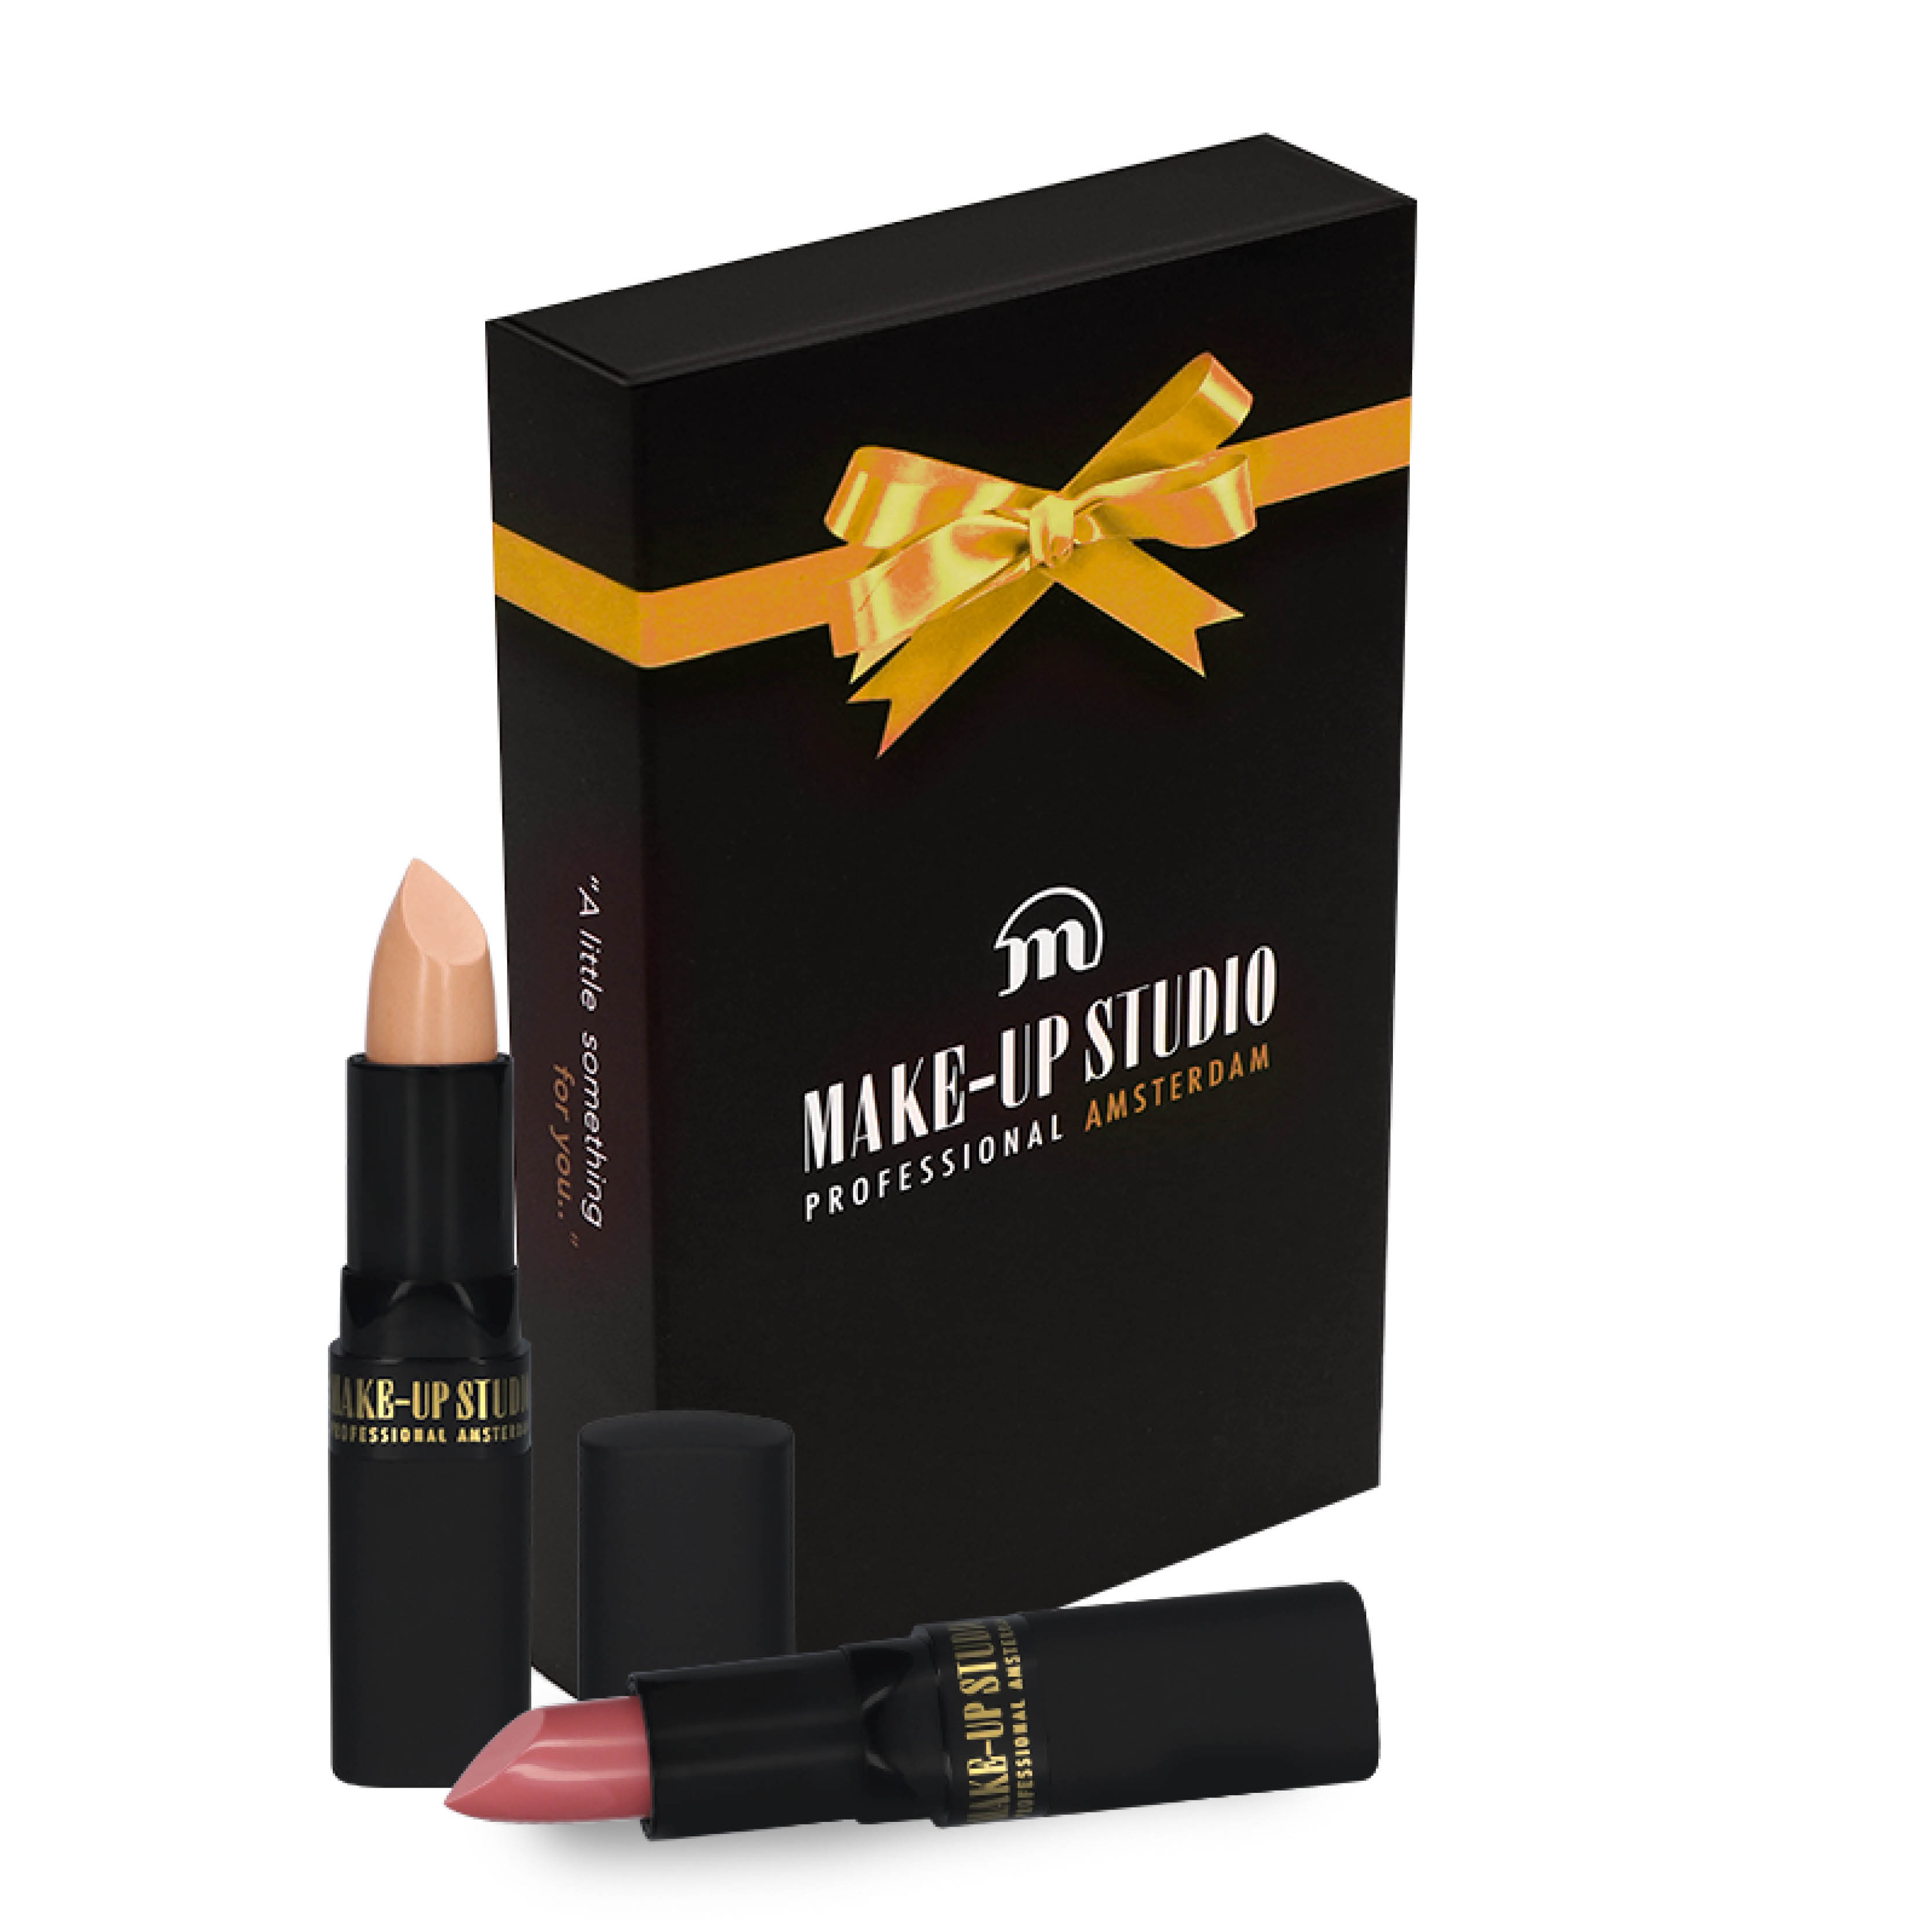 Shop all lip products from Make-up Studio online! | Make-up Studio Amsterdam